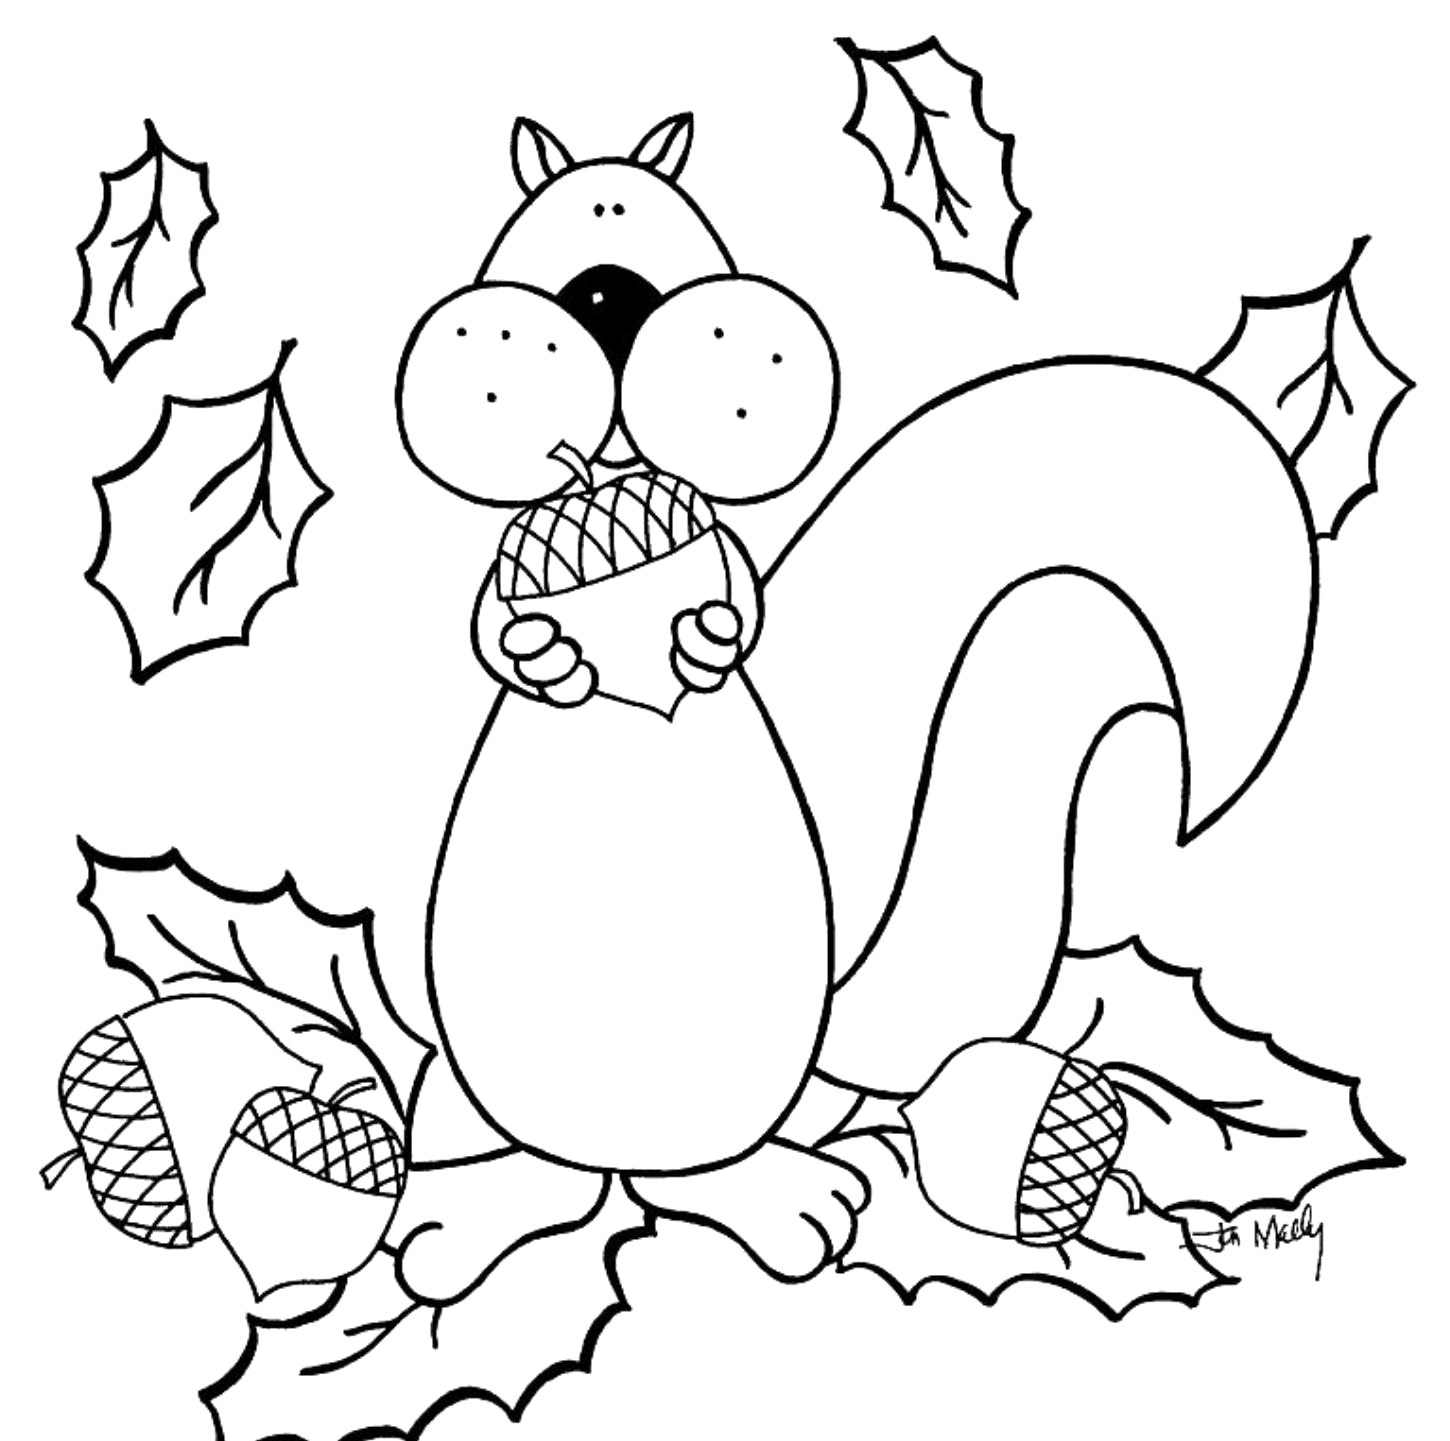 Free Printable Fall Coloring Pages For Kids - Best Coloring Pages - Free Printable Fall Coloring Pages